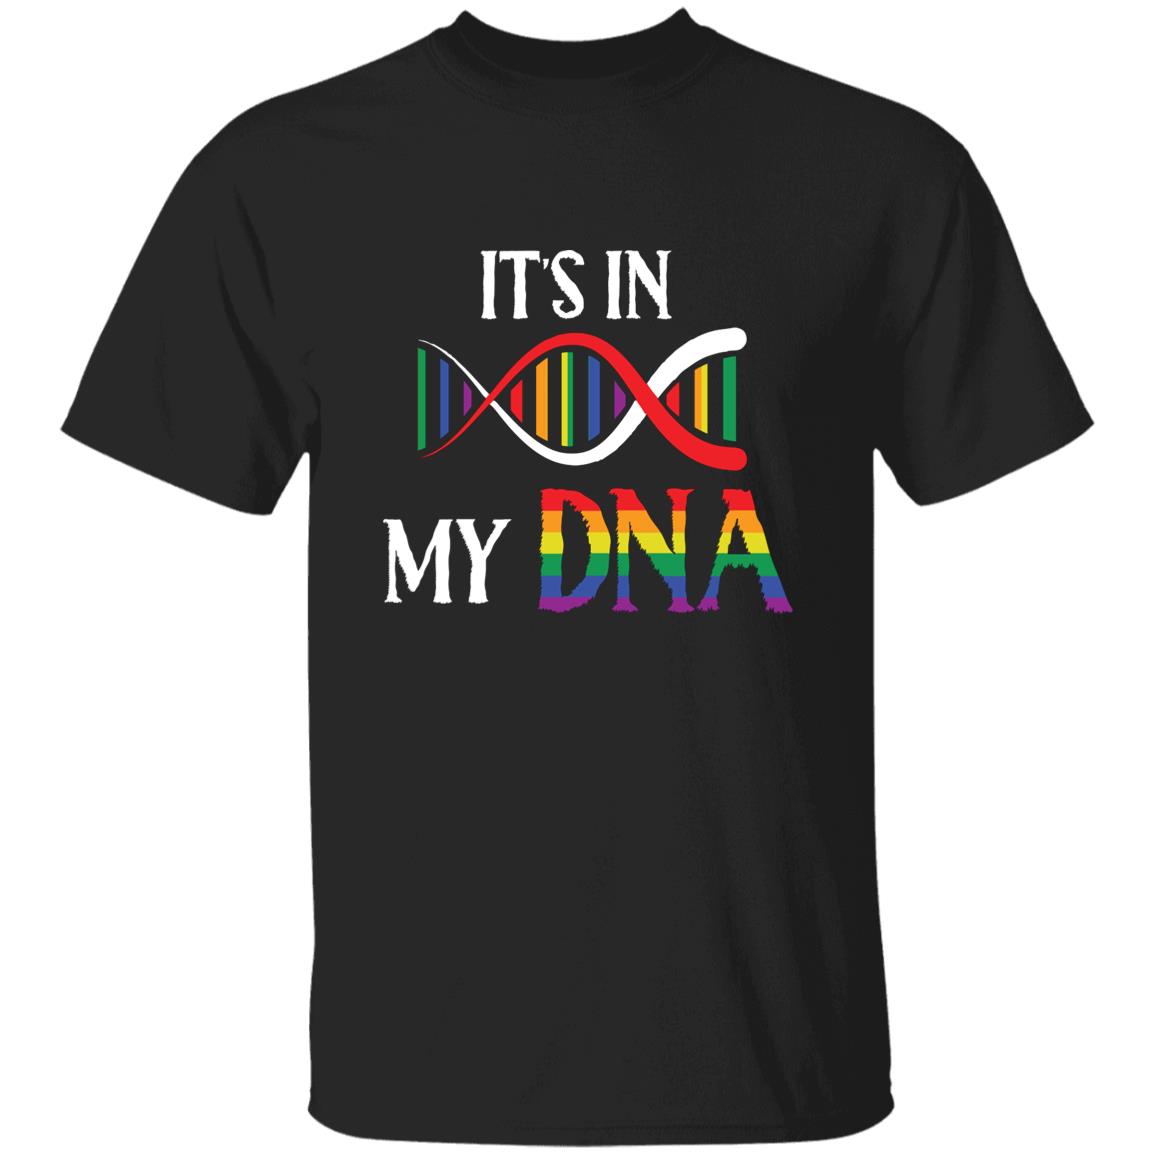 It's In My DNA - T shirt & Hoodie